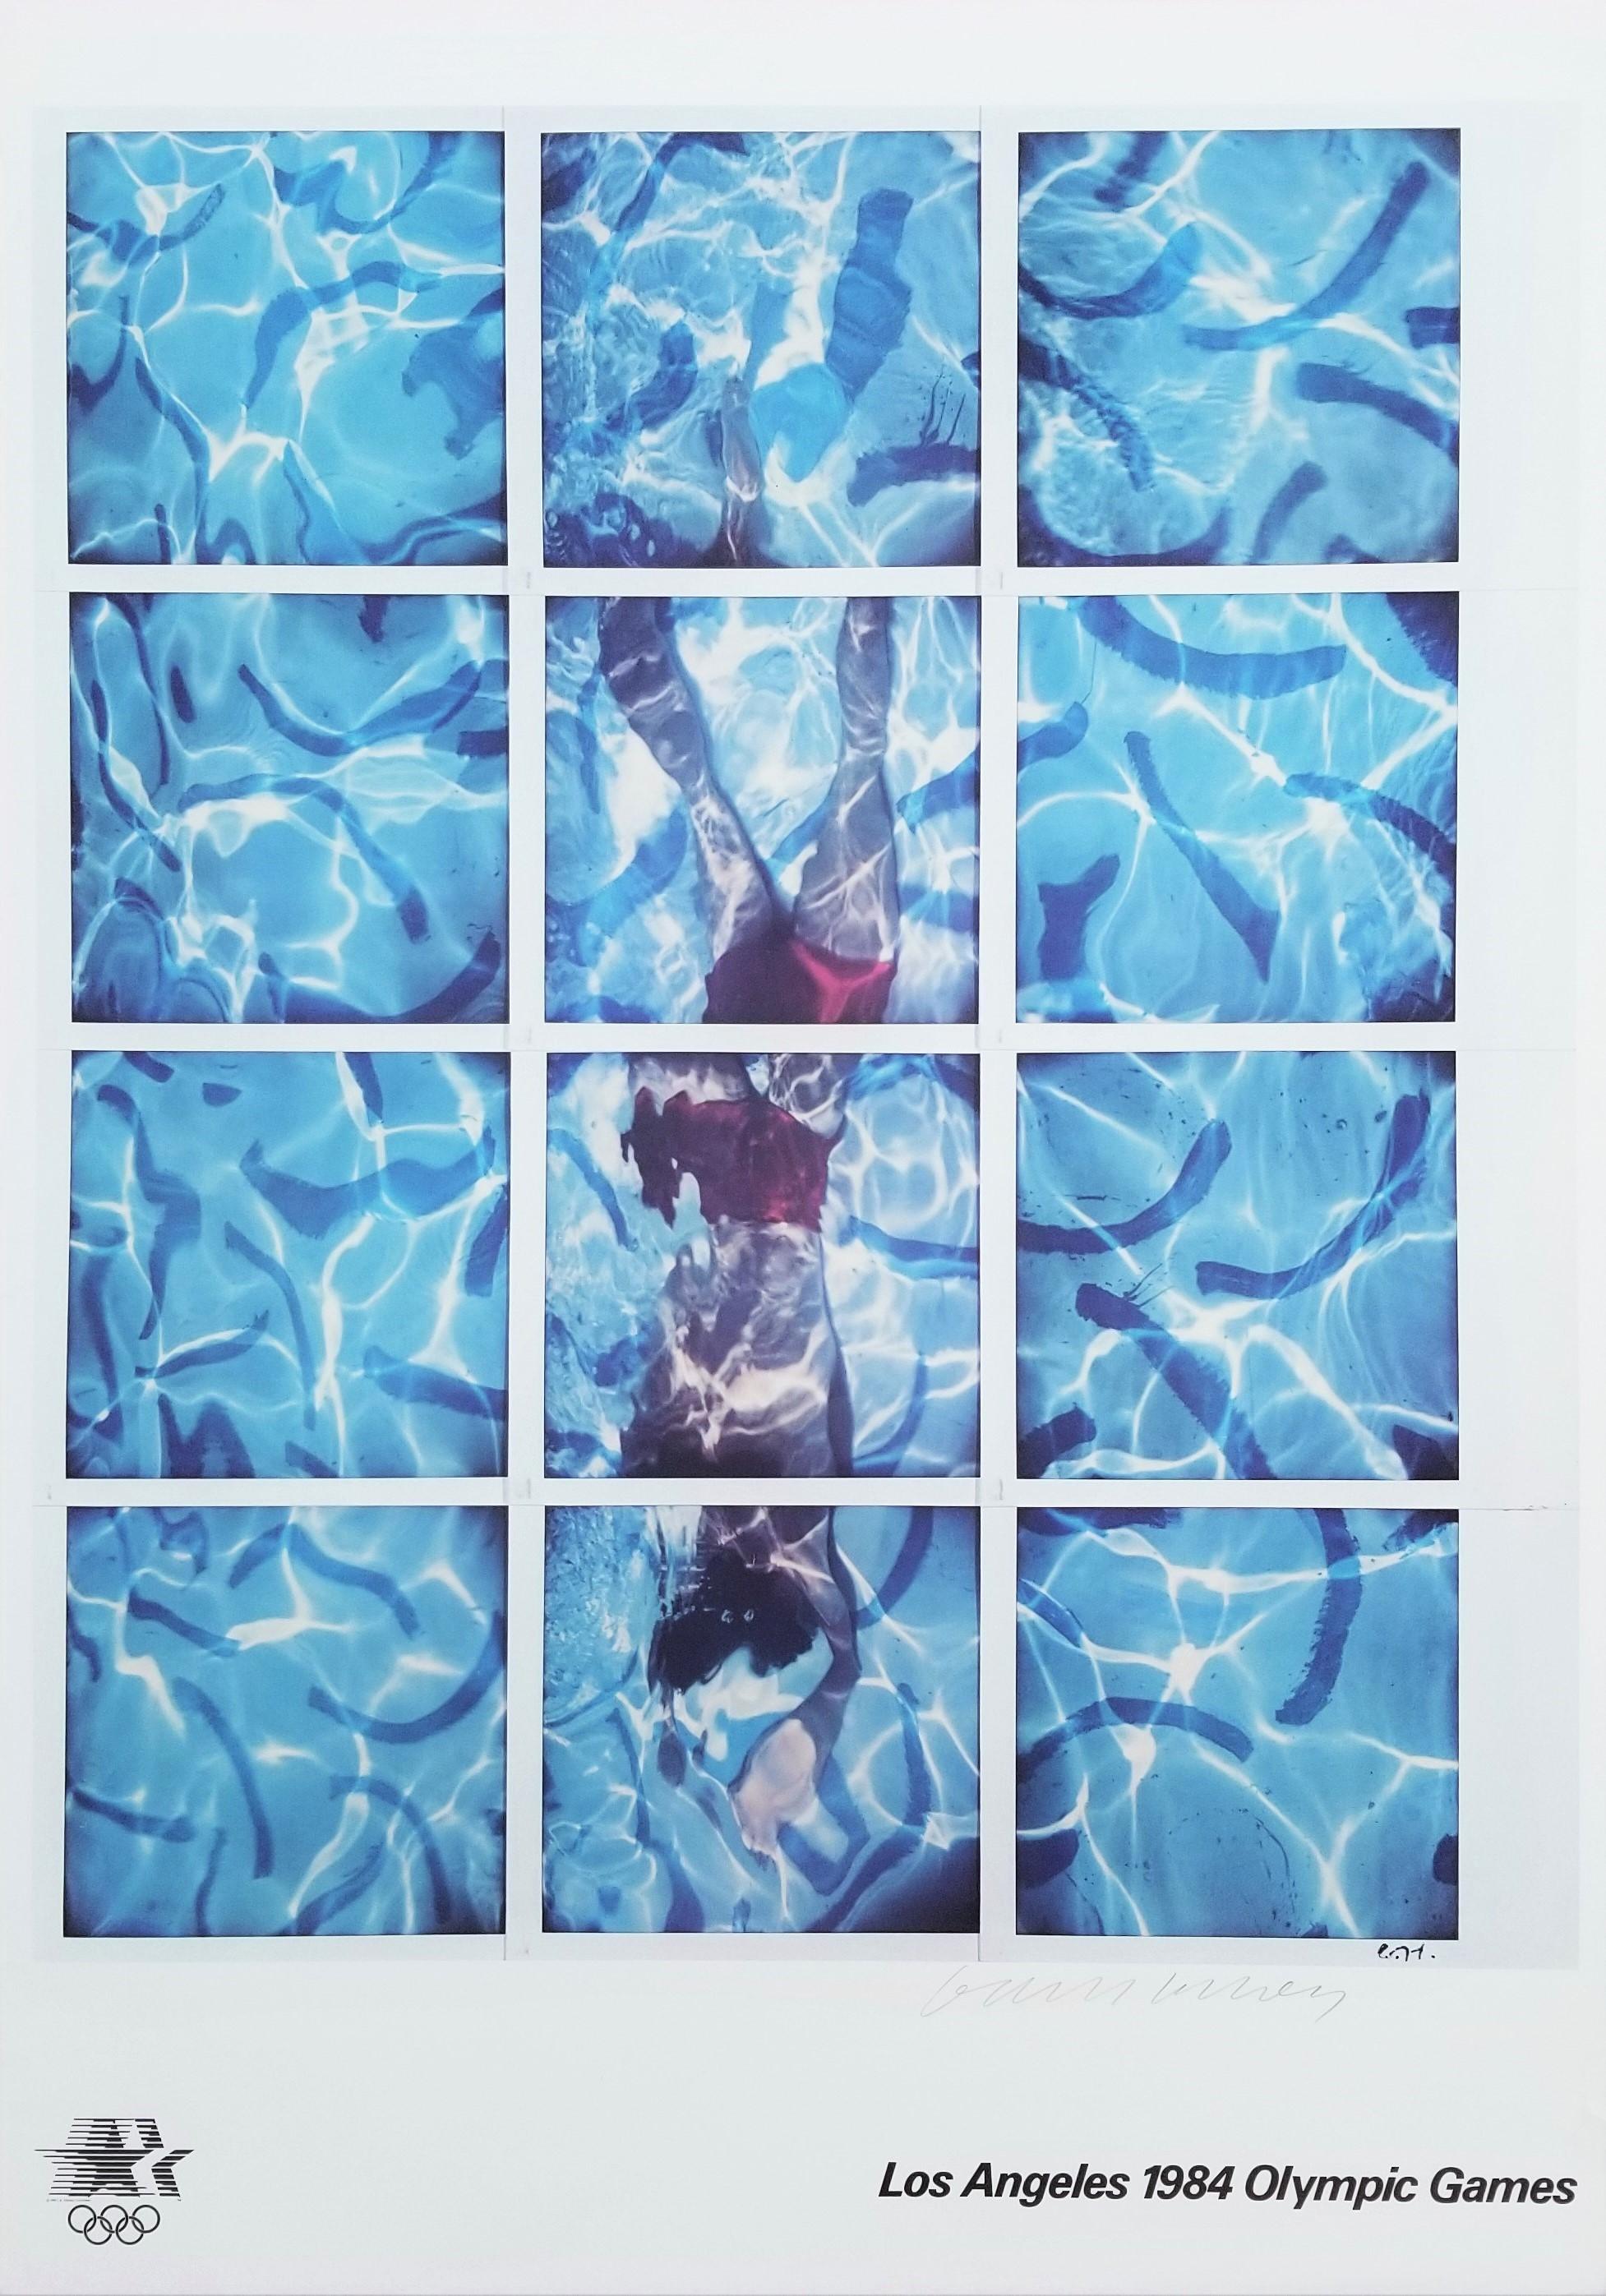 David Hockney Figurative Print - Los Angeles 1984 Olympic Games (Polaroids of Swimmer) Poster (Signed)